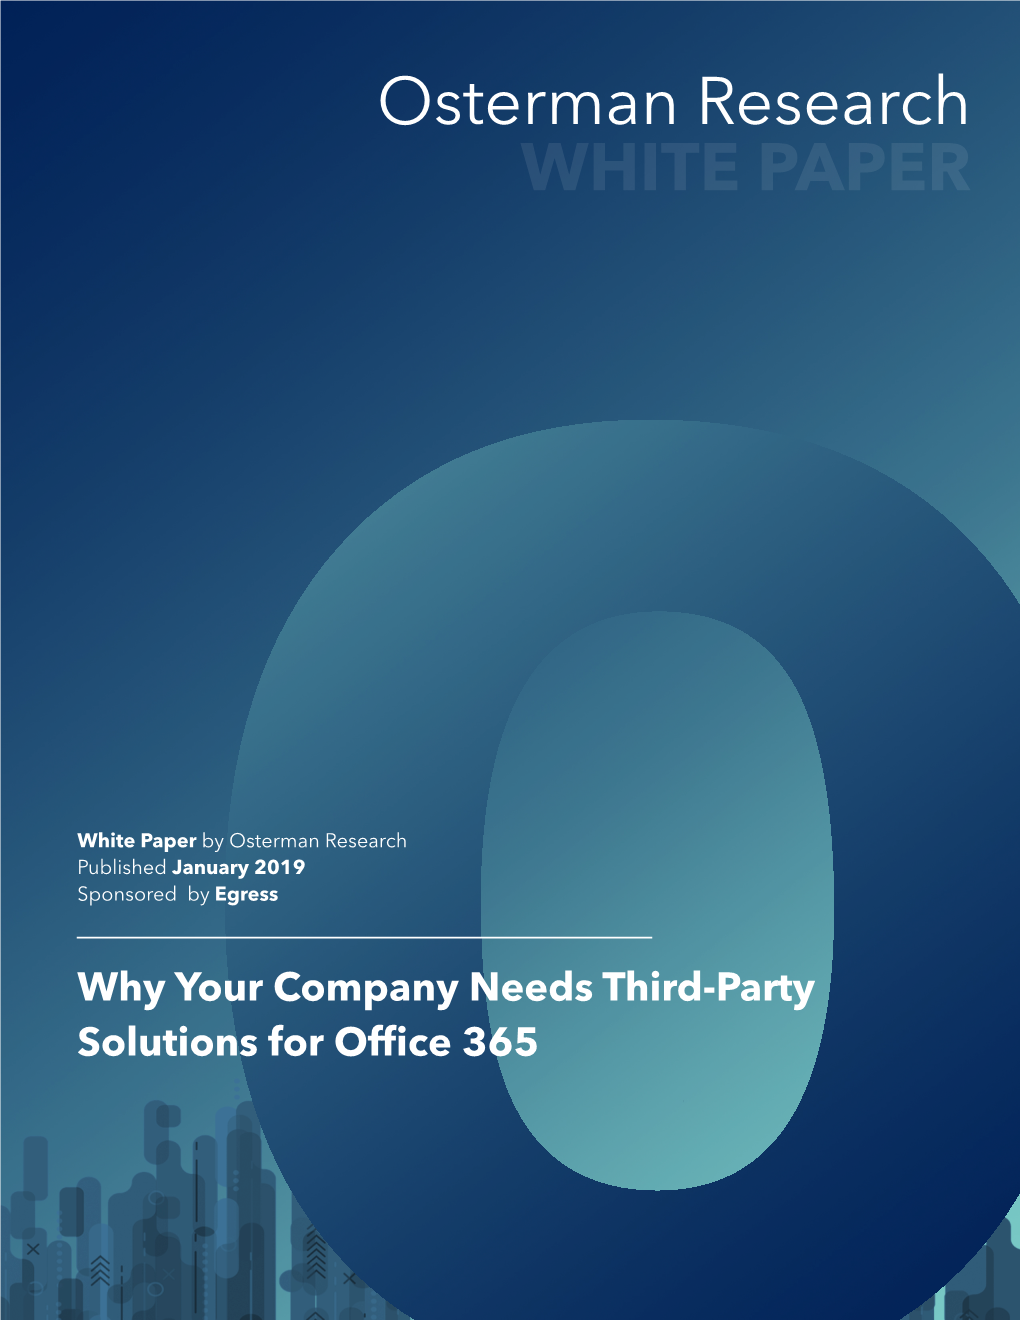 Why Your Company Needs Third Party Solutions for Office